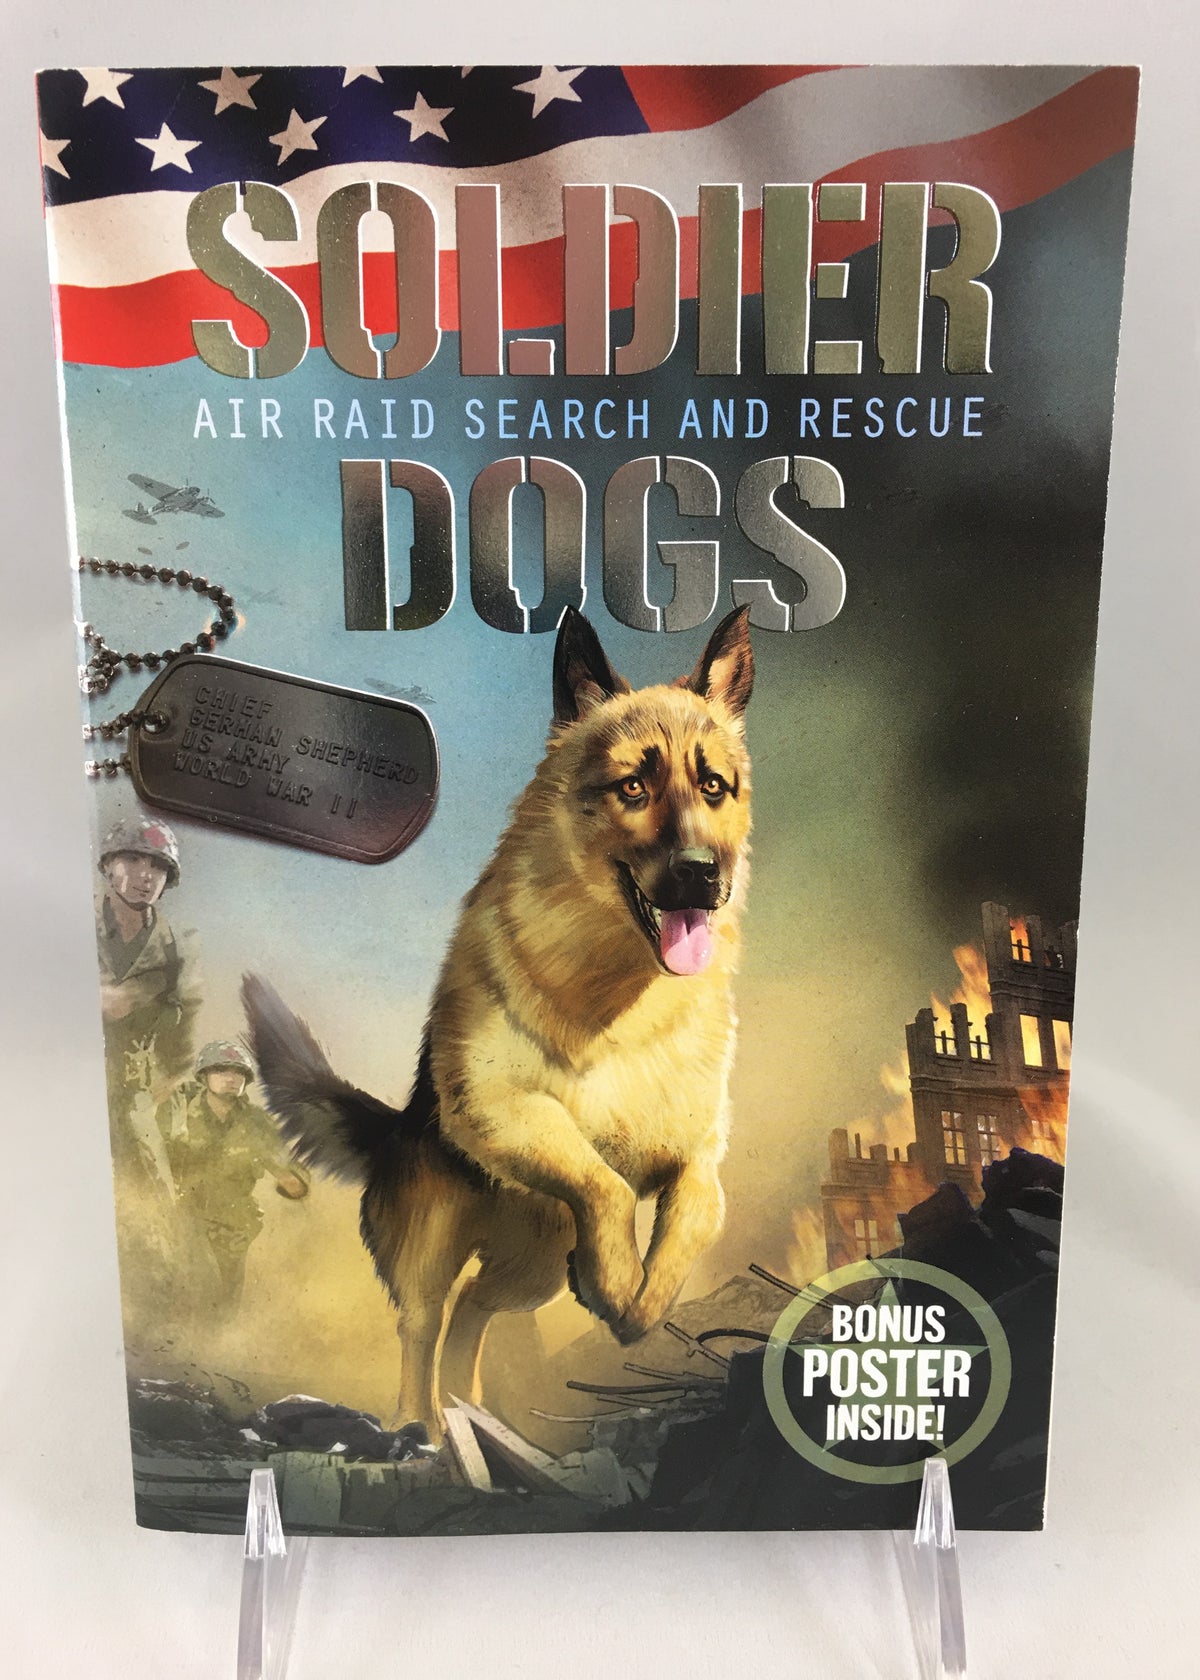 Soldier Dogs; Air Raid Search and Rescue